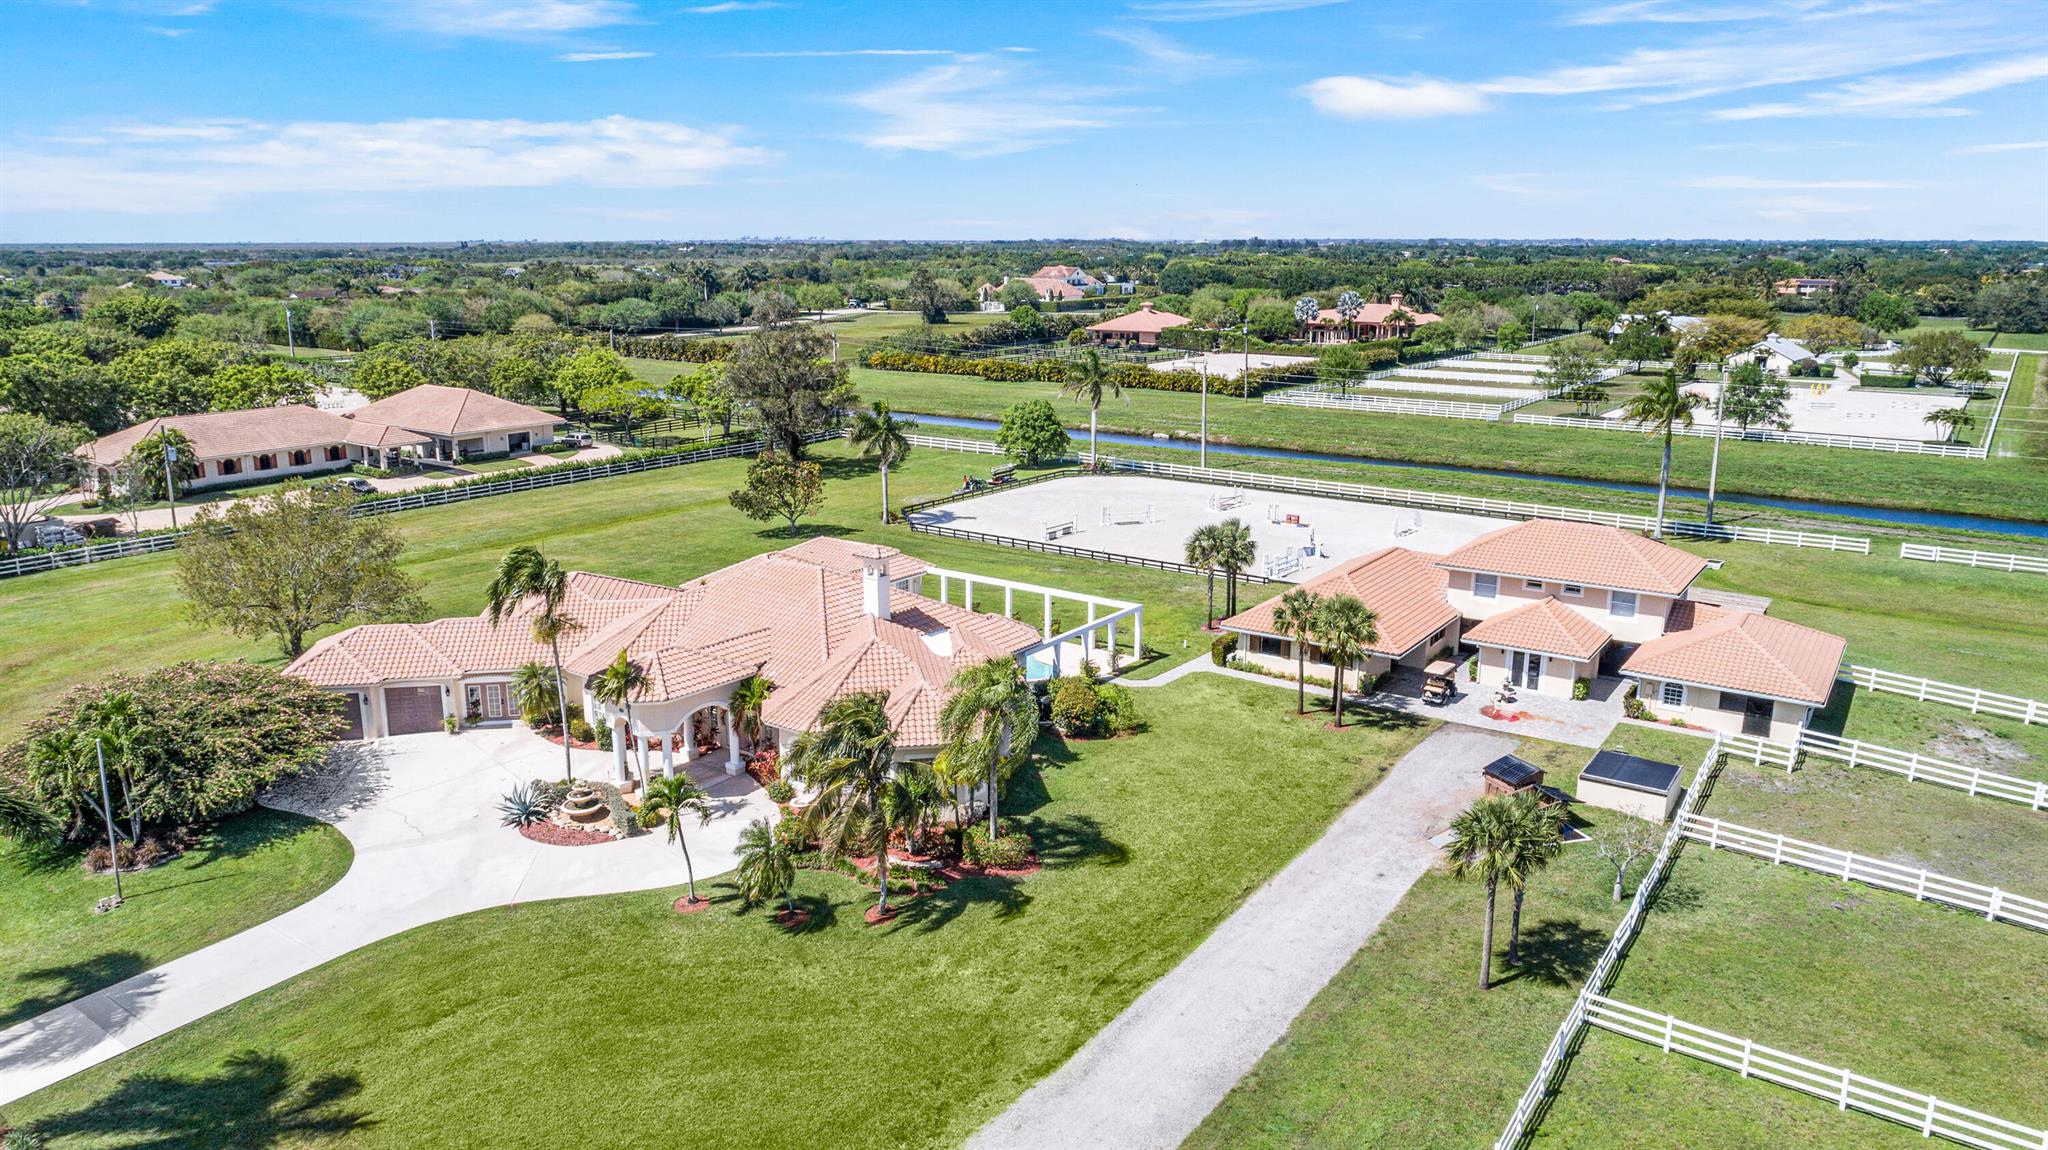 Seasonal Price Breakdown: $10,500 per stall for season 3 staff quarters priced at $2,000 each per monthMain house $10,000 per month Ideal season property in gated Palm Beach Point Community!This 5 bedroom home along with a mother in-law suite offers plenty of room to enjoy the 2025 Florida season. Sit pool side and enjoy watching your horses train. The 11 stall barn offers your horses with an off-site oasis within hacking a viewing lounge for clients of the arena, a laundry room, feed room, and tack room. Above the barn there are two separate staff quarters that over look the riding arena. The large riding arena  with all weather footing. The 5.5 acre property offers 4 paddocks. Could be available as an annual rent upon request.